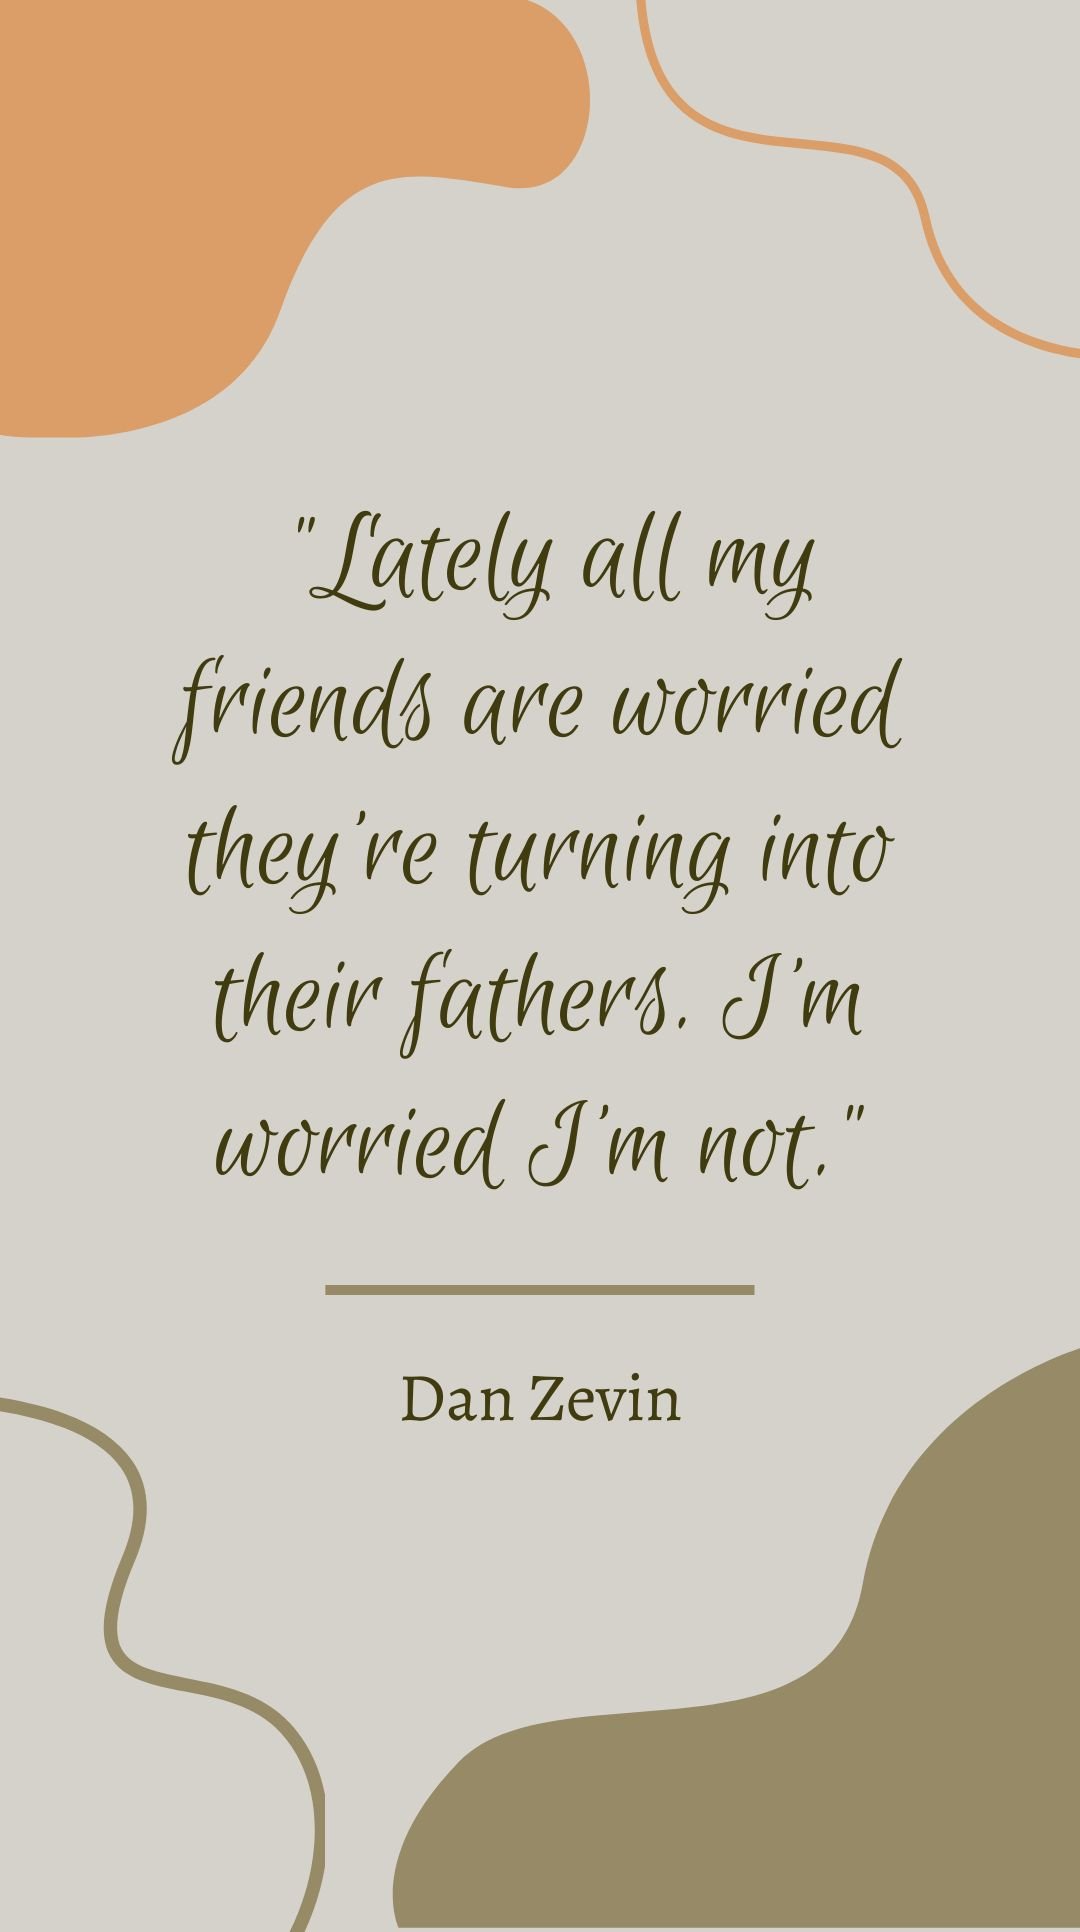  Dan Zevin - Lately all my friends are worried they’re turning into their fathers. I’m worried I’m not.